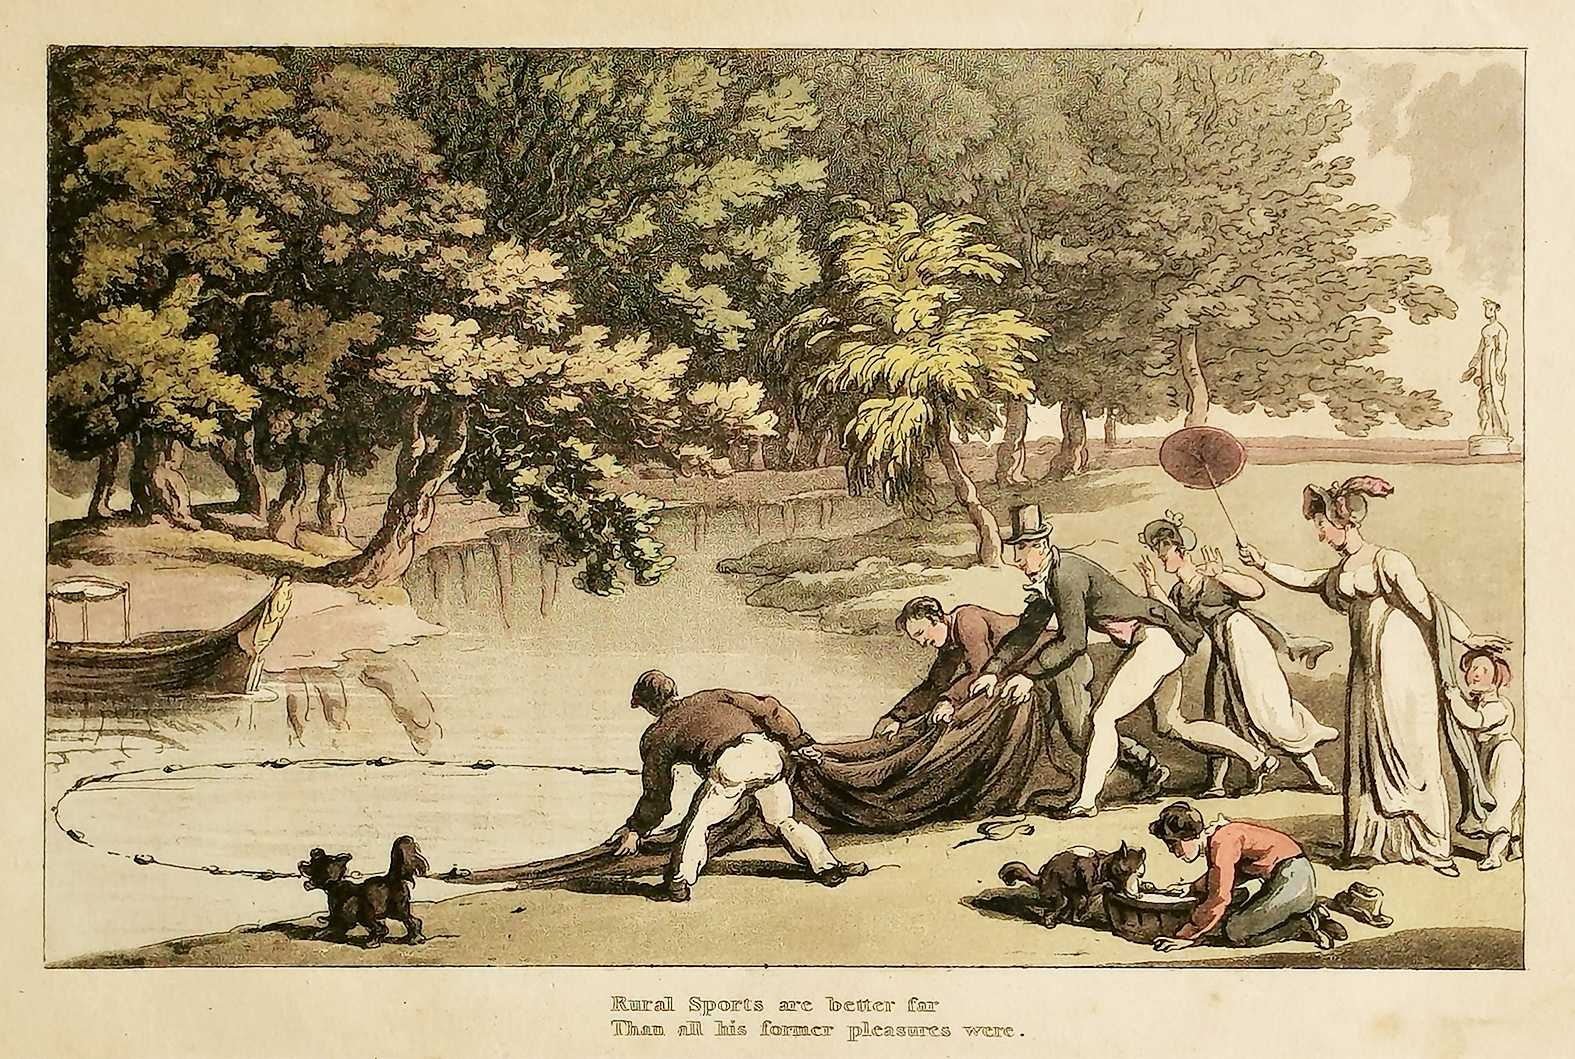 Rural sports are better far than all his former pleasures were. - Antique Print from 1817